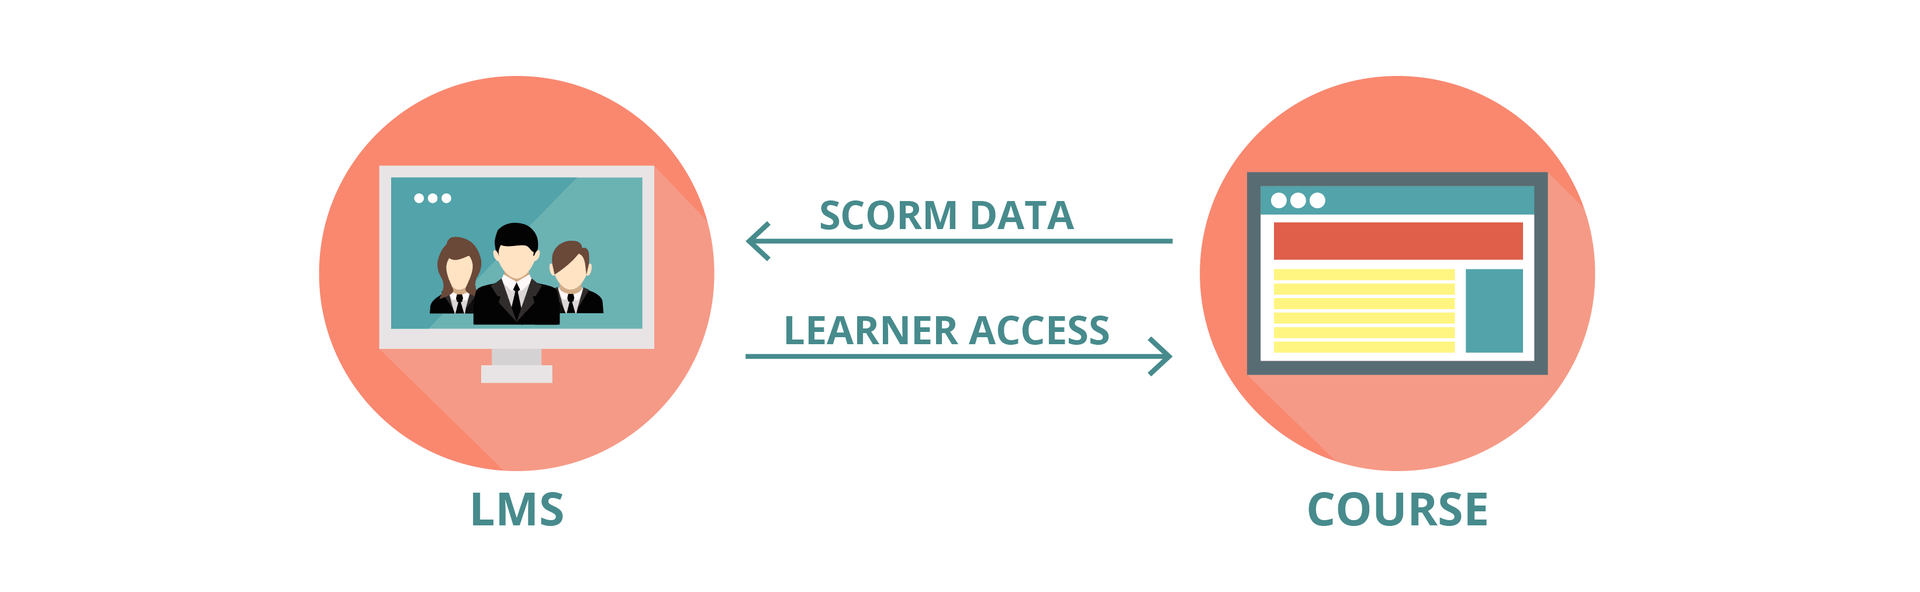 Icon of LMS and Course interacting. Learners access course on LMS and course sends SCORM data to LMS.